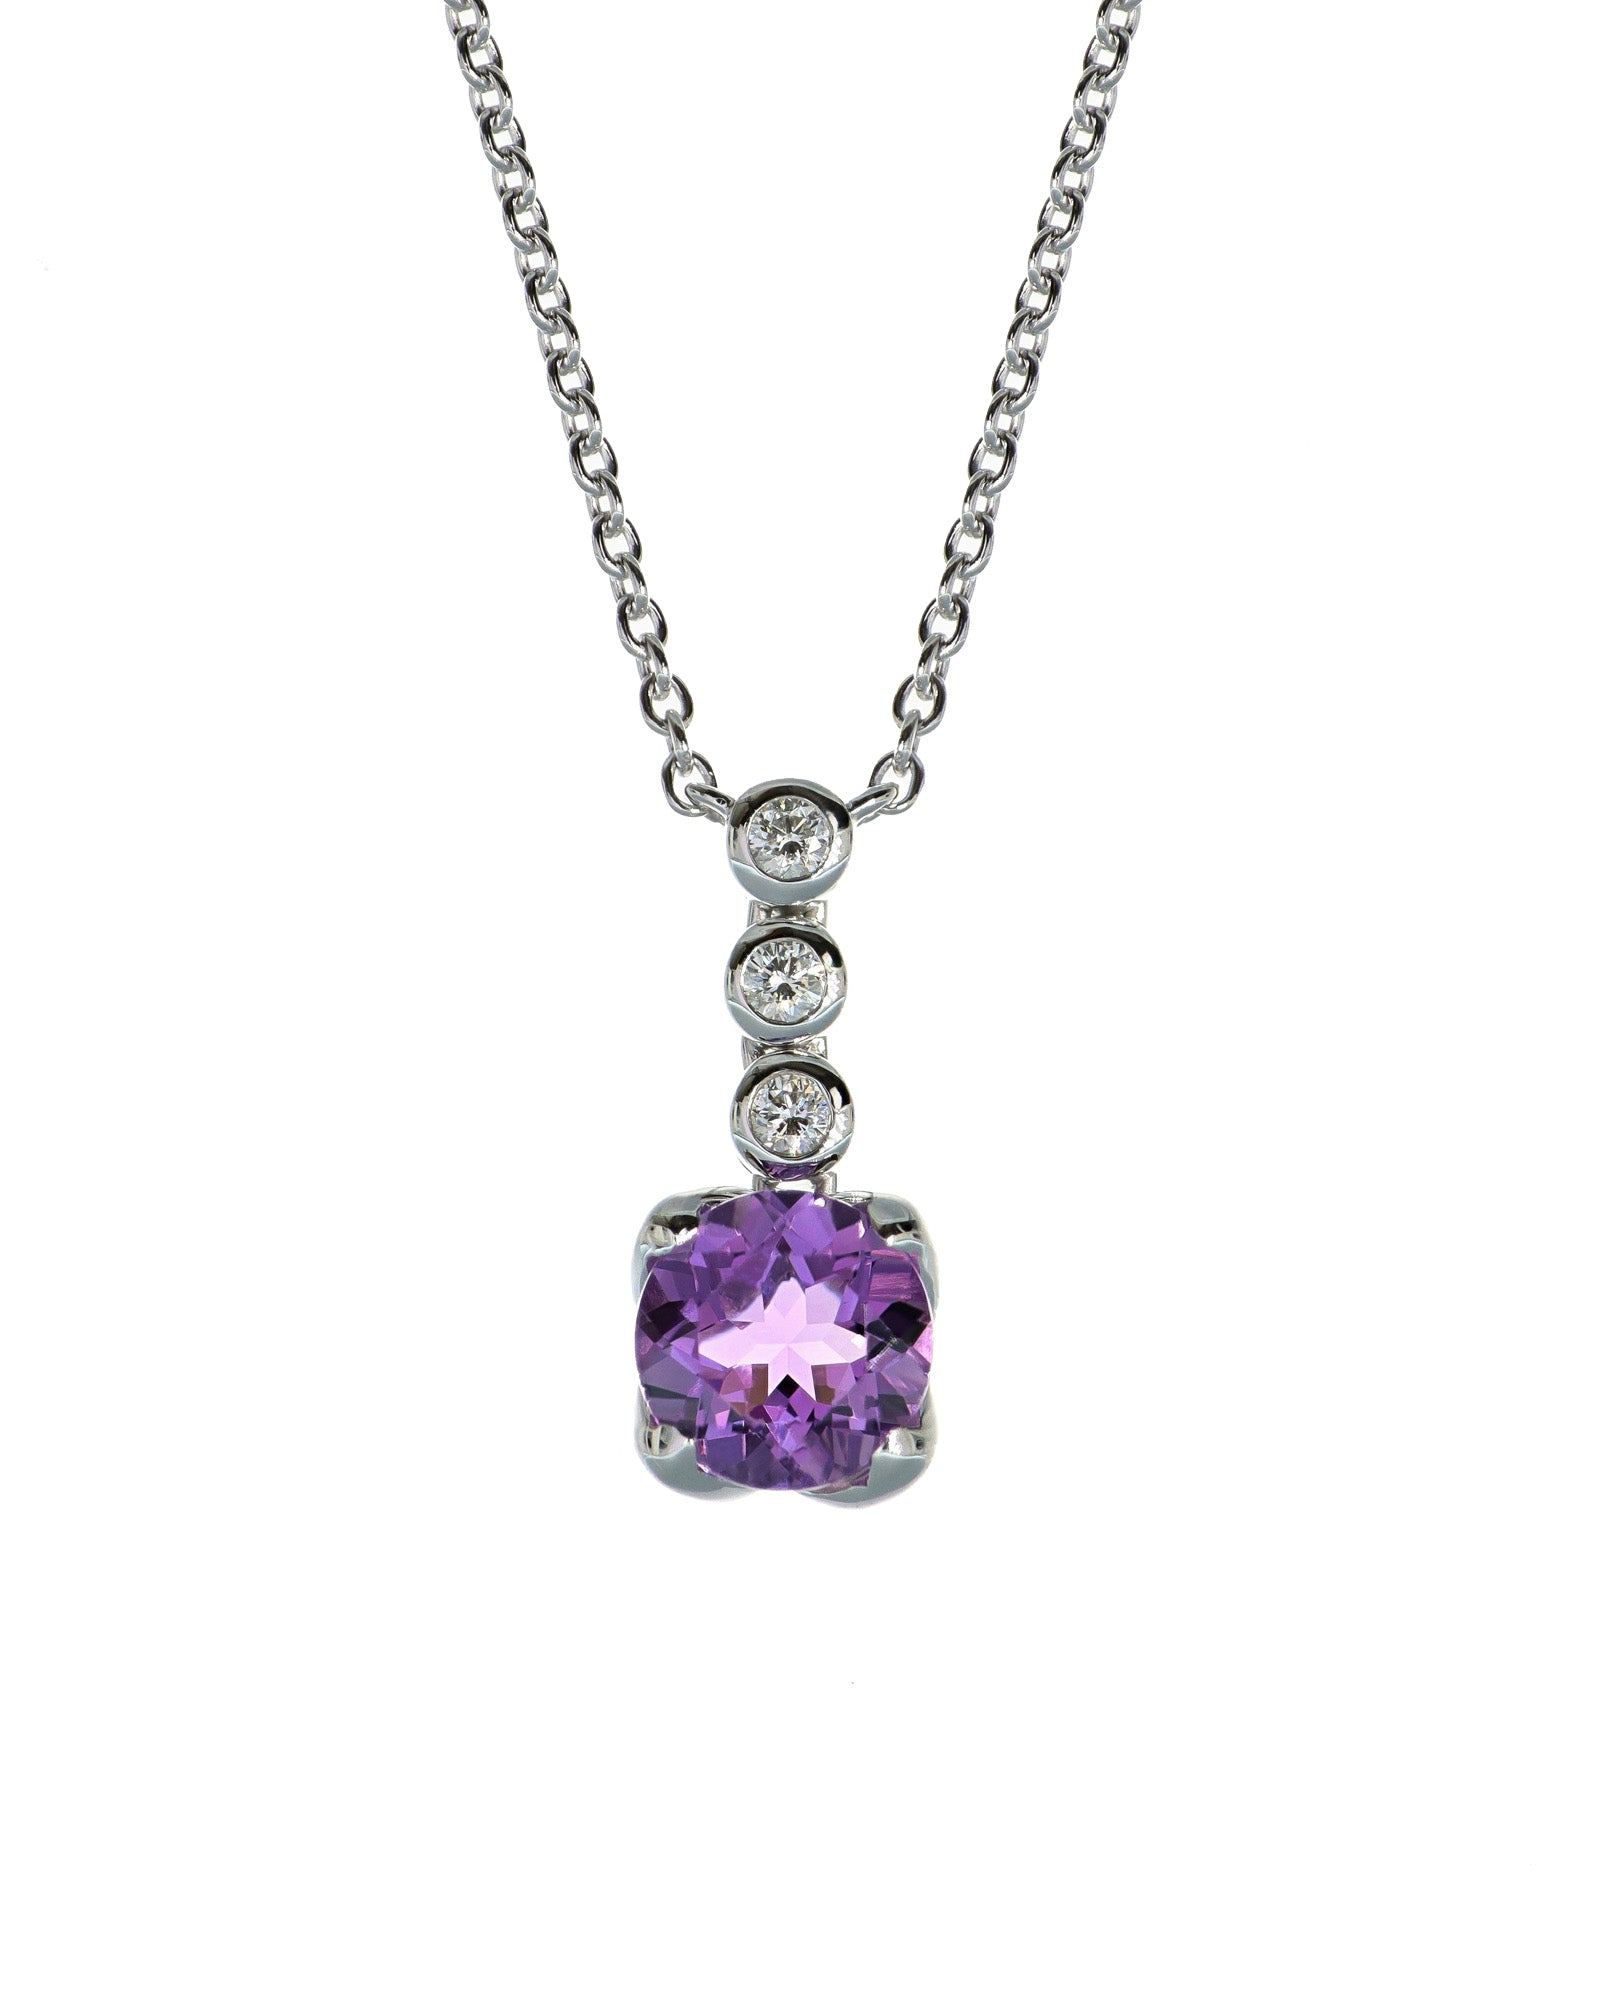 Amethyst and Diamonds Necklace